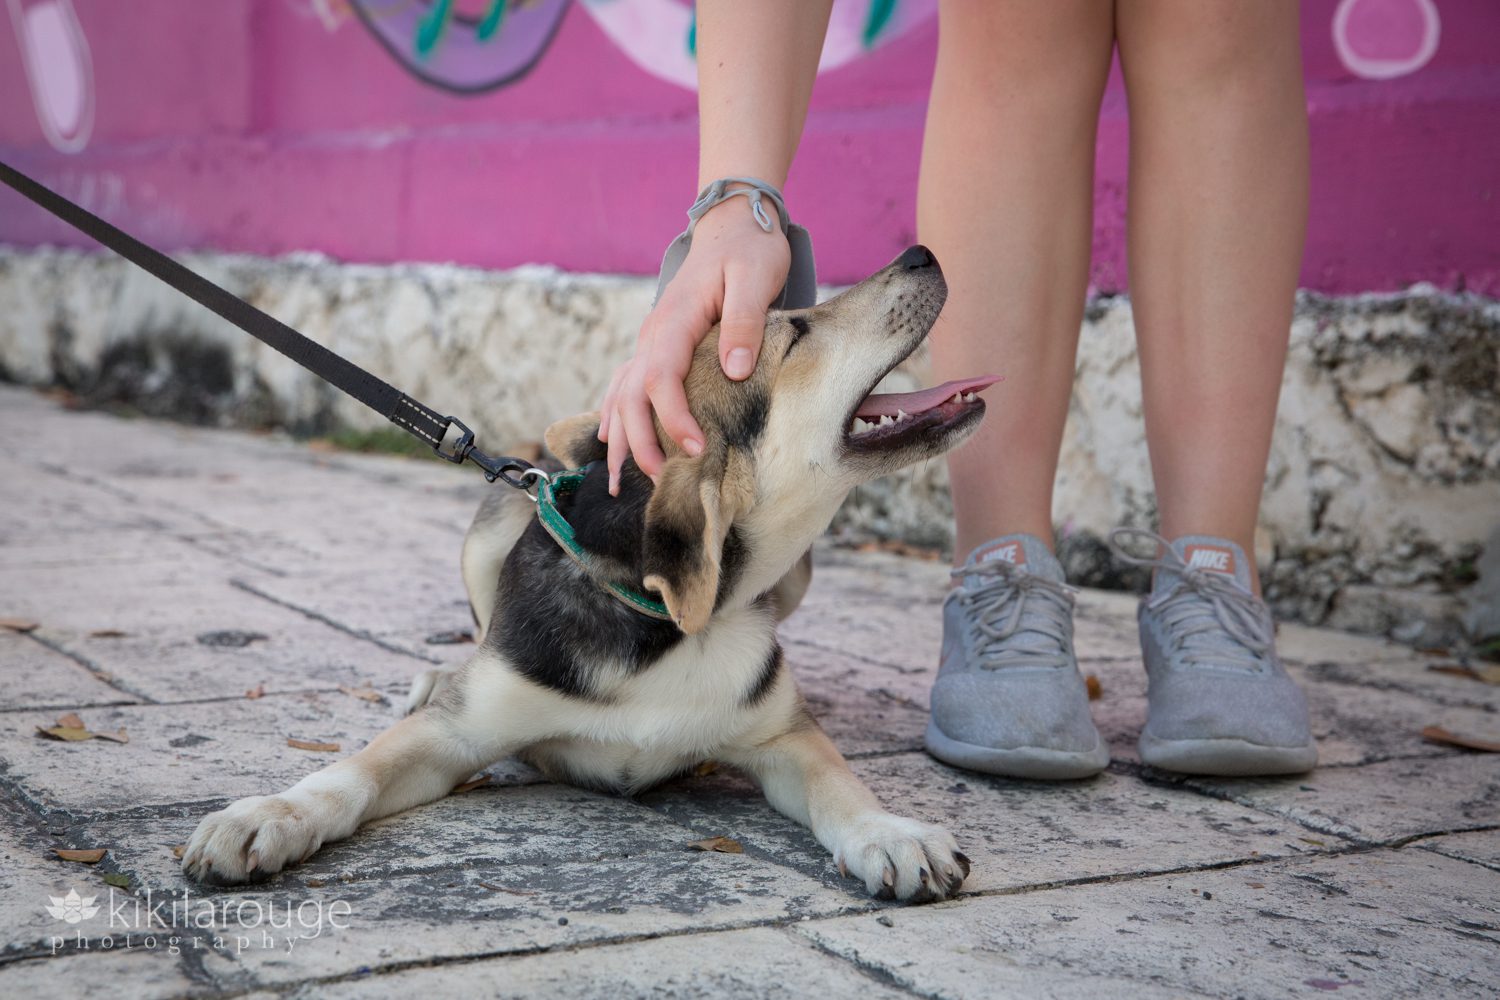 Cute tan puppy getting pat on sidewalk by young girl